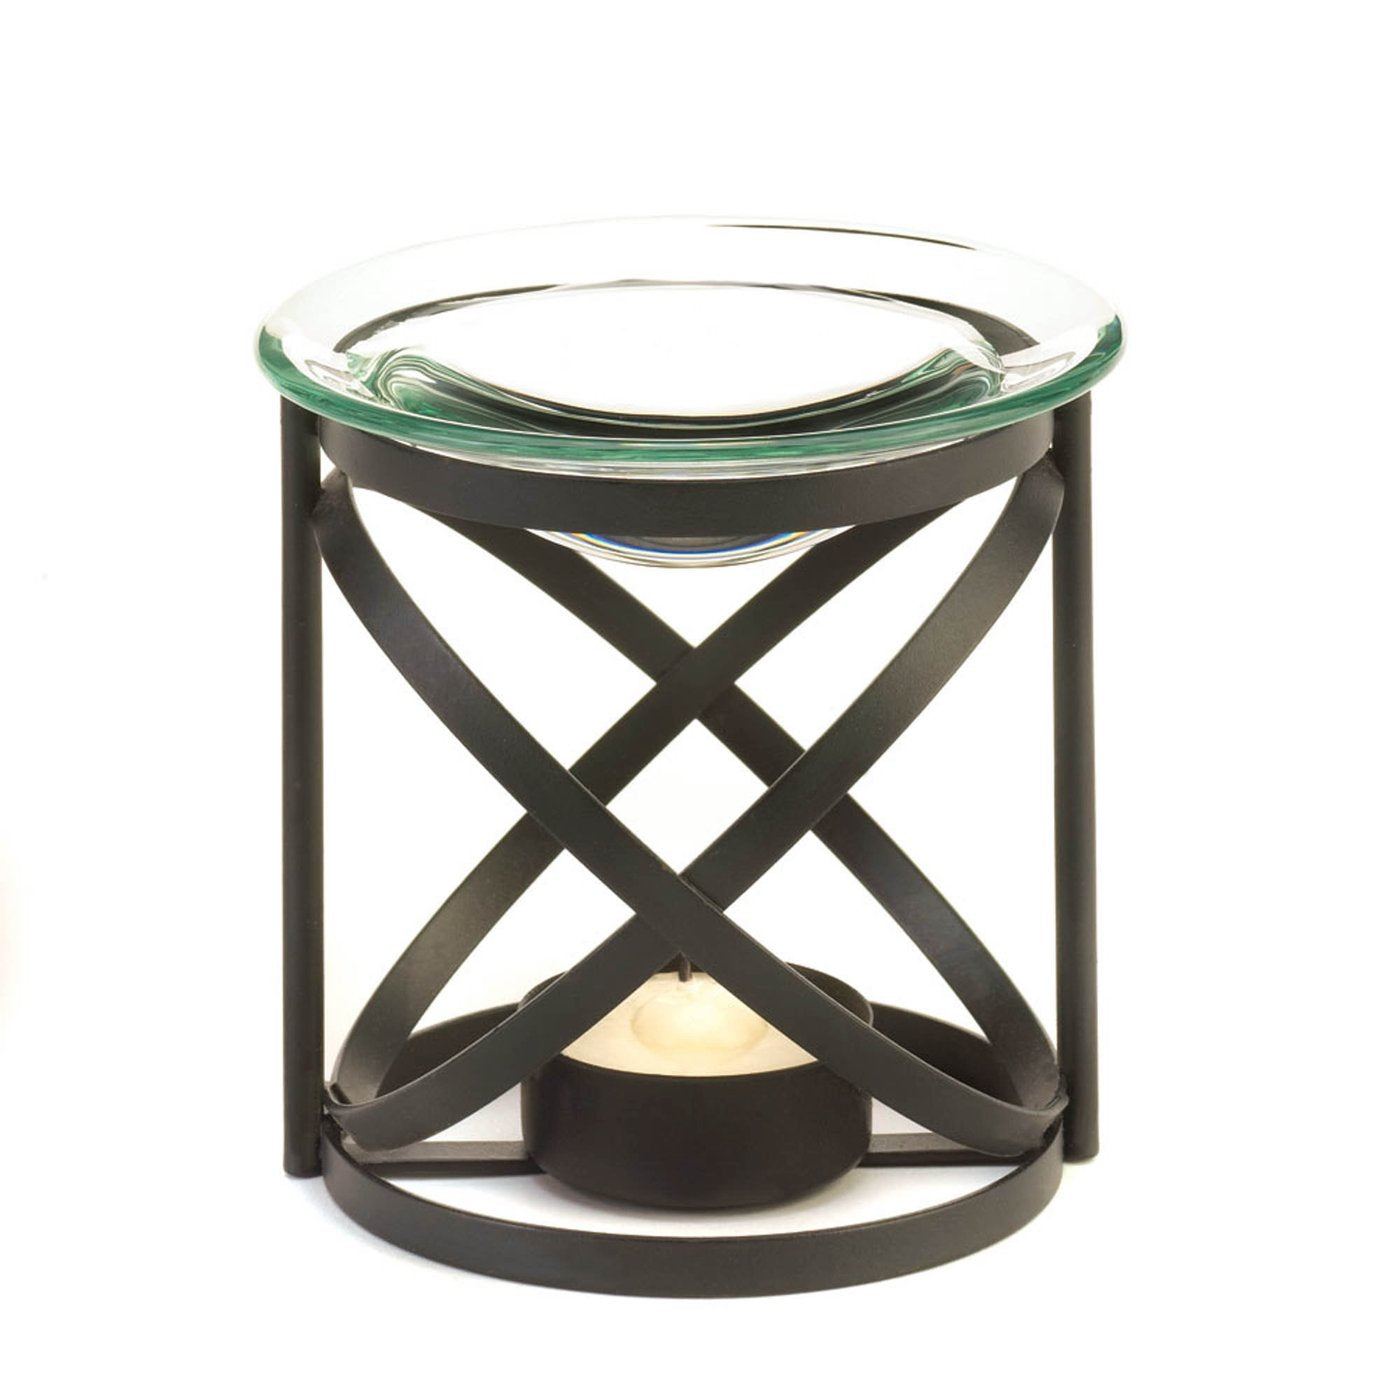 Black Metal and glass Orbital Oil Warmer by Fragrance Foundry